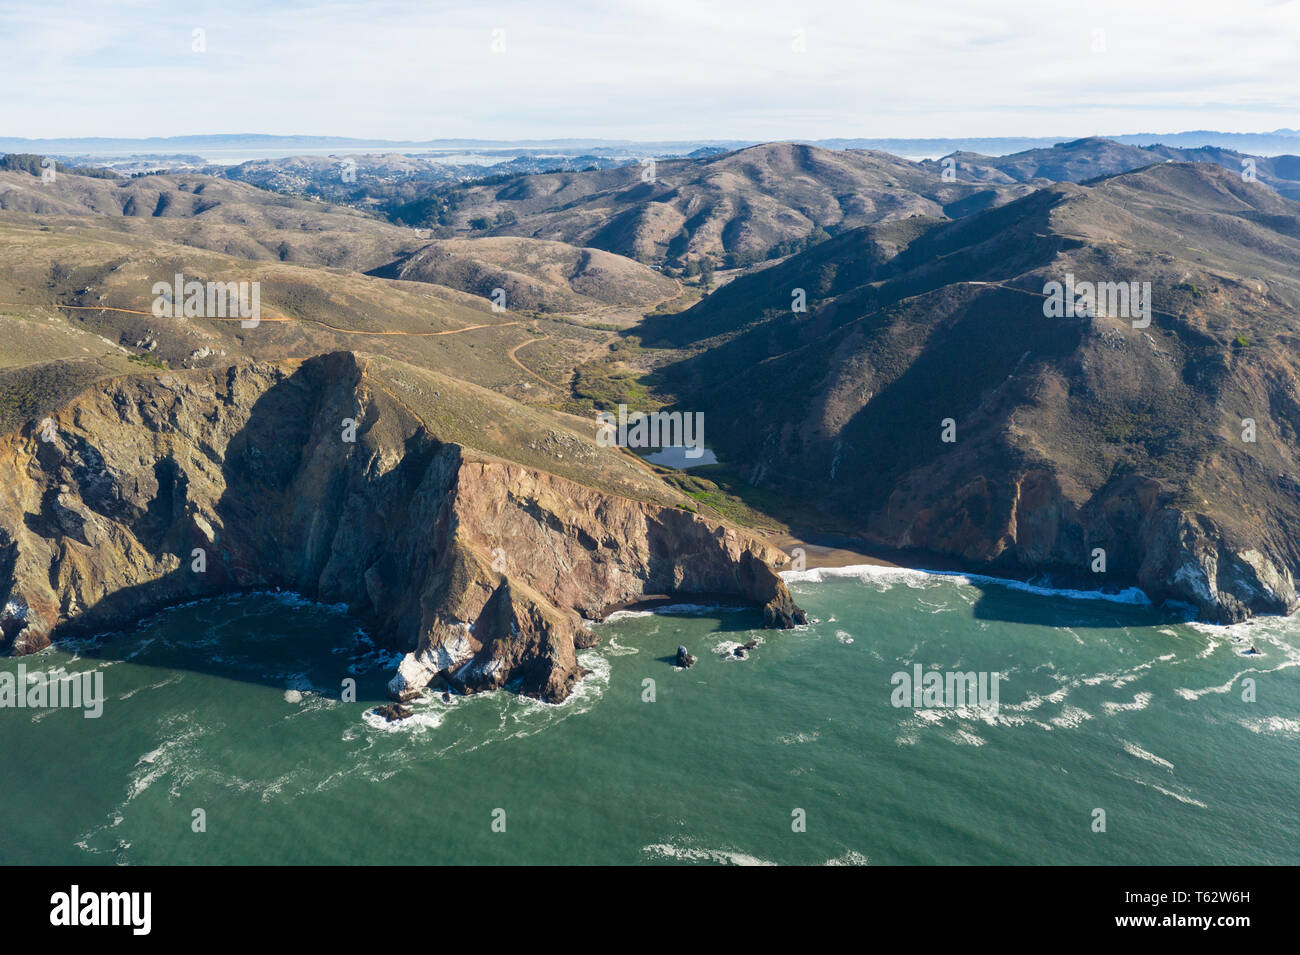 Seen from an aerial perspective, the cold waters of the Pacific Ocean wash against the rocky Northern California coastline in Marin. Stock Photo